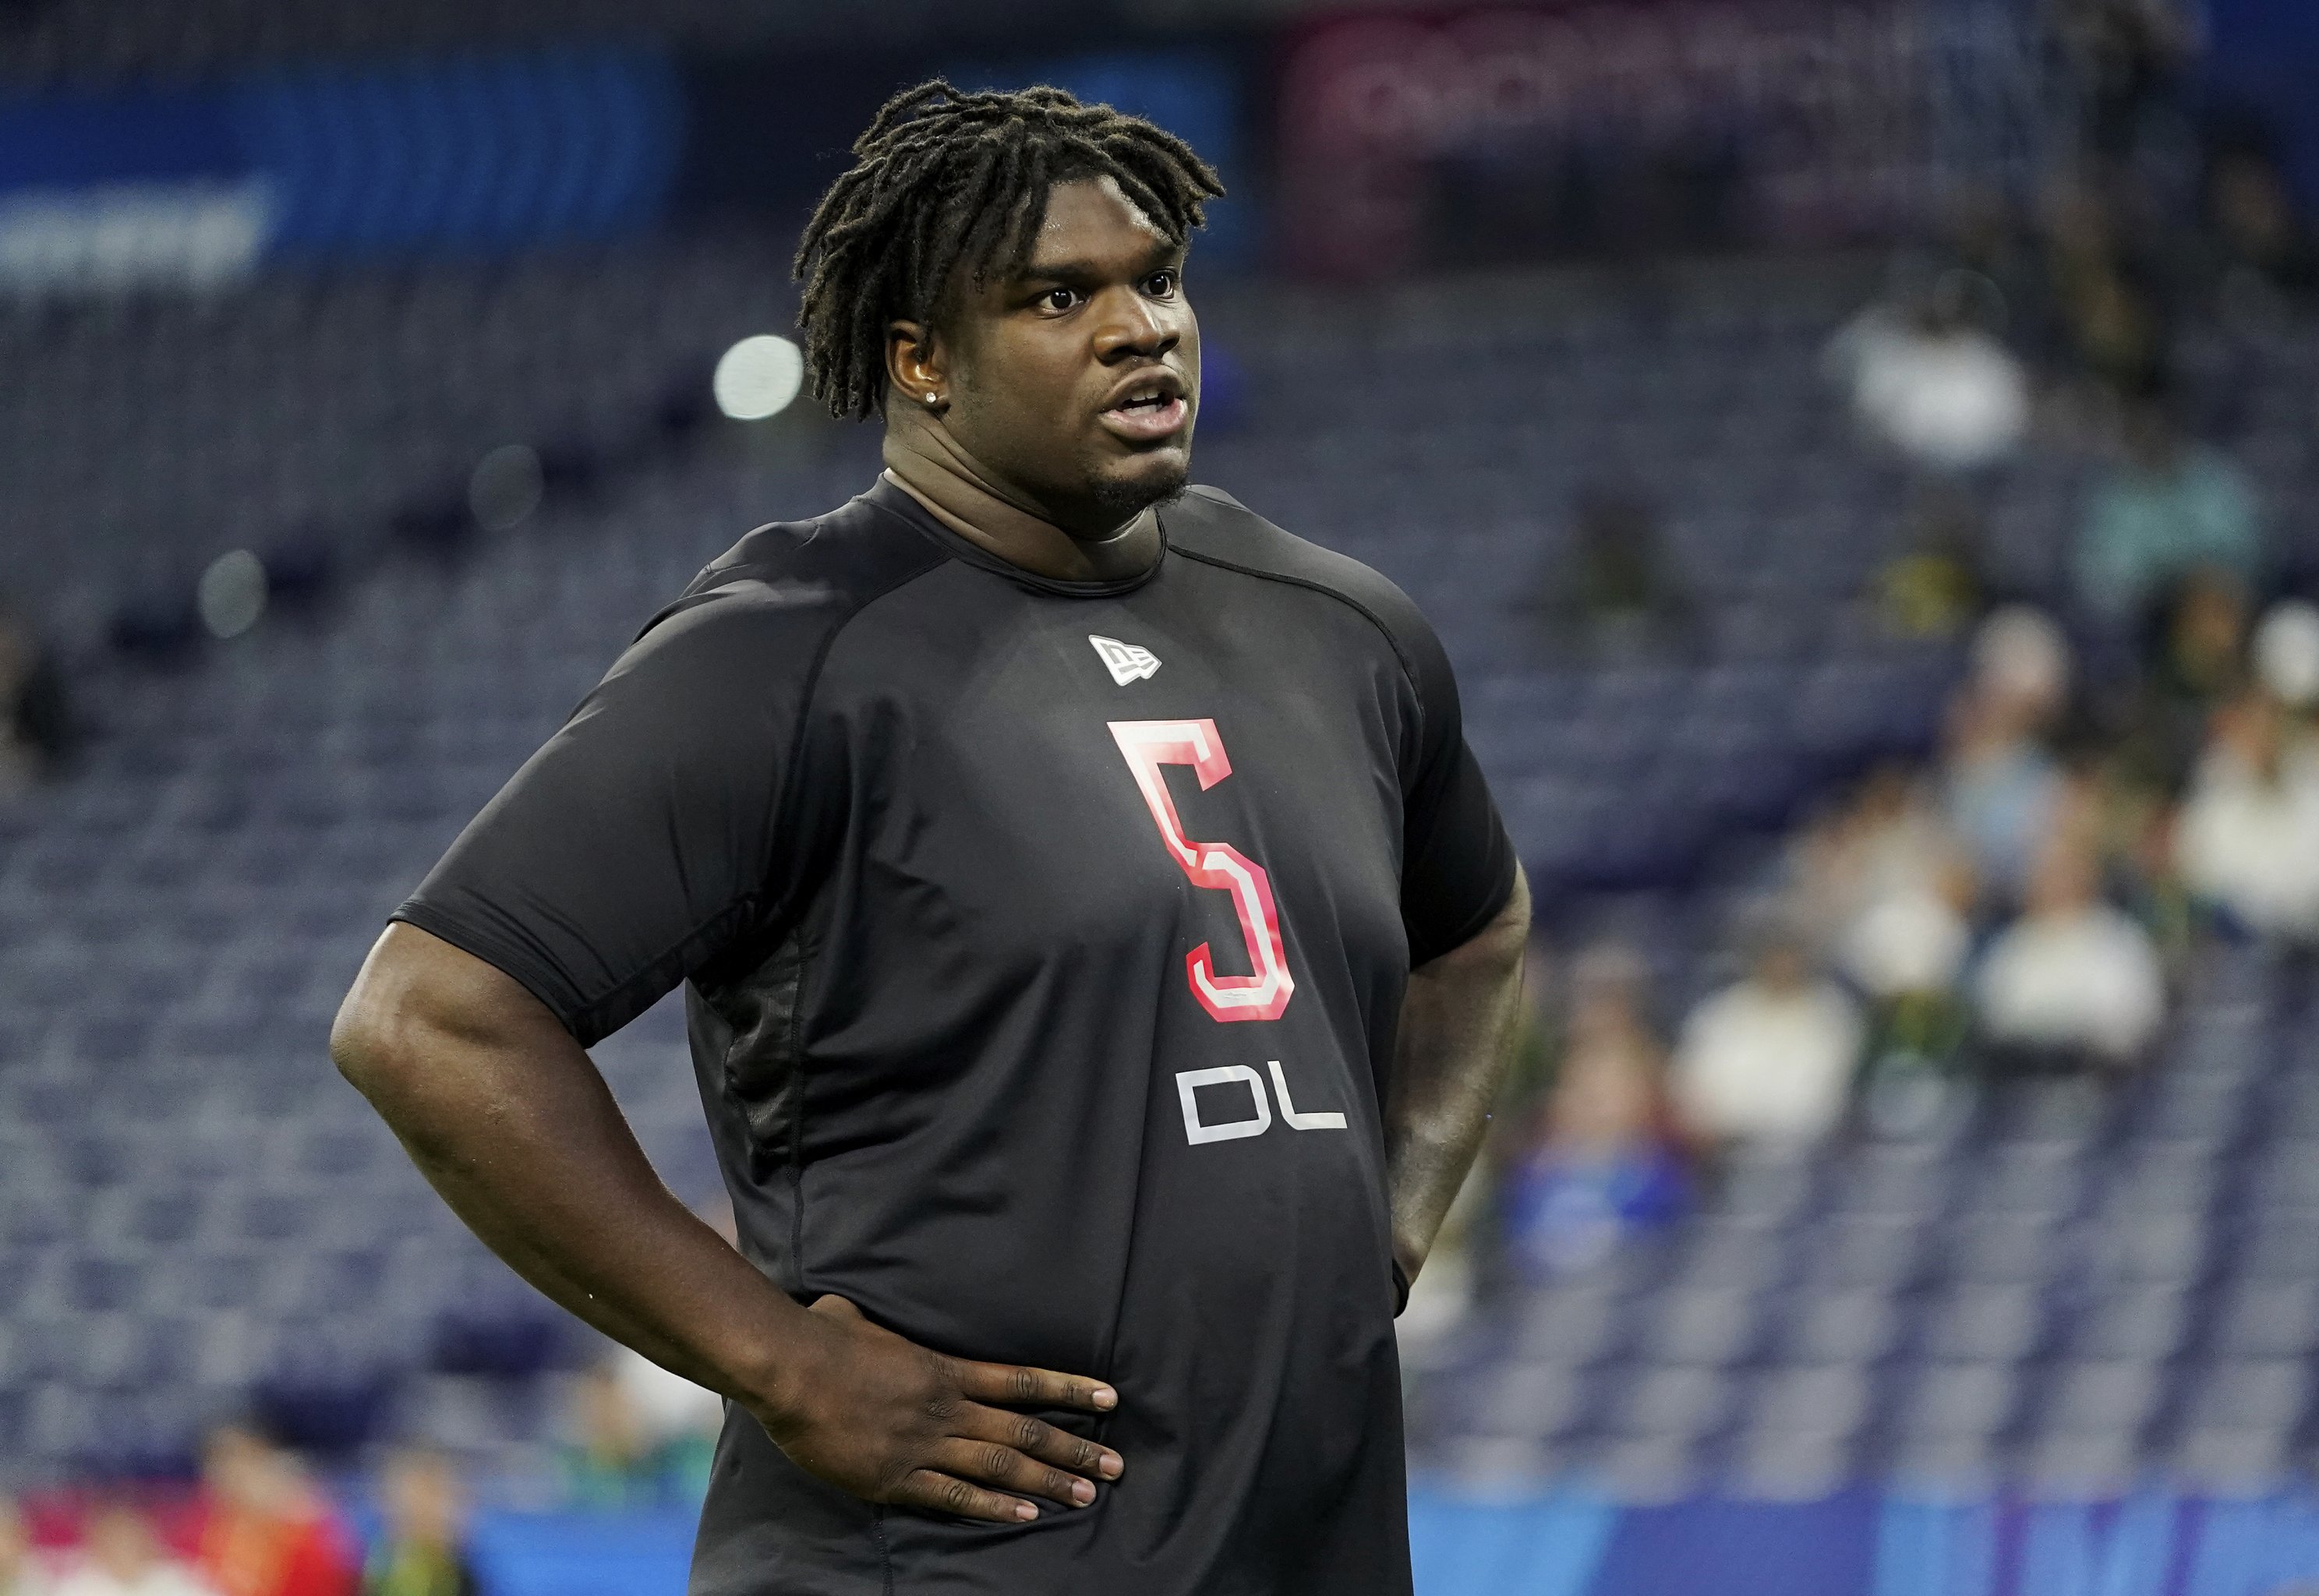 NFL Combine Results: List of Offensive Lineman 40-Yard Dash Times